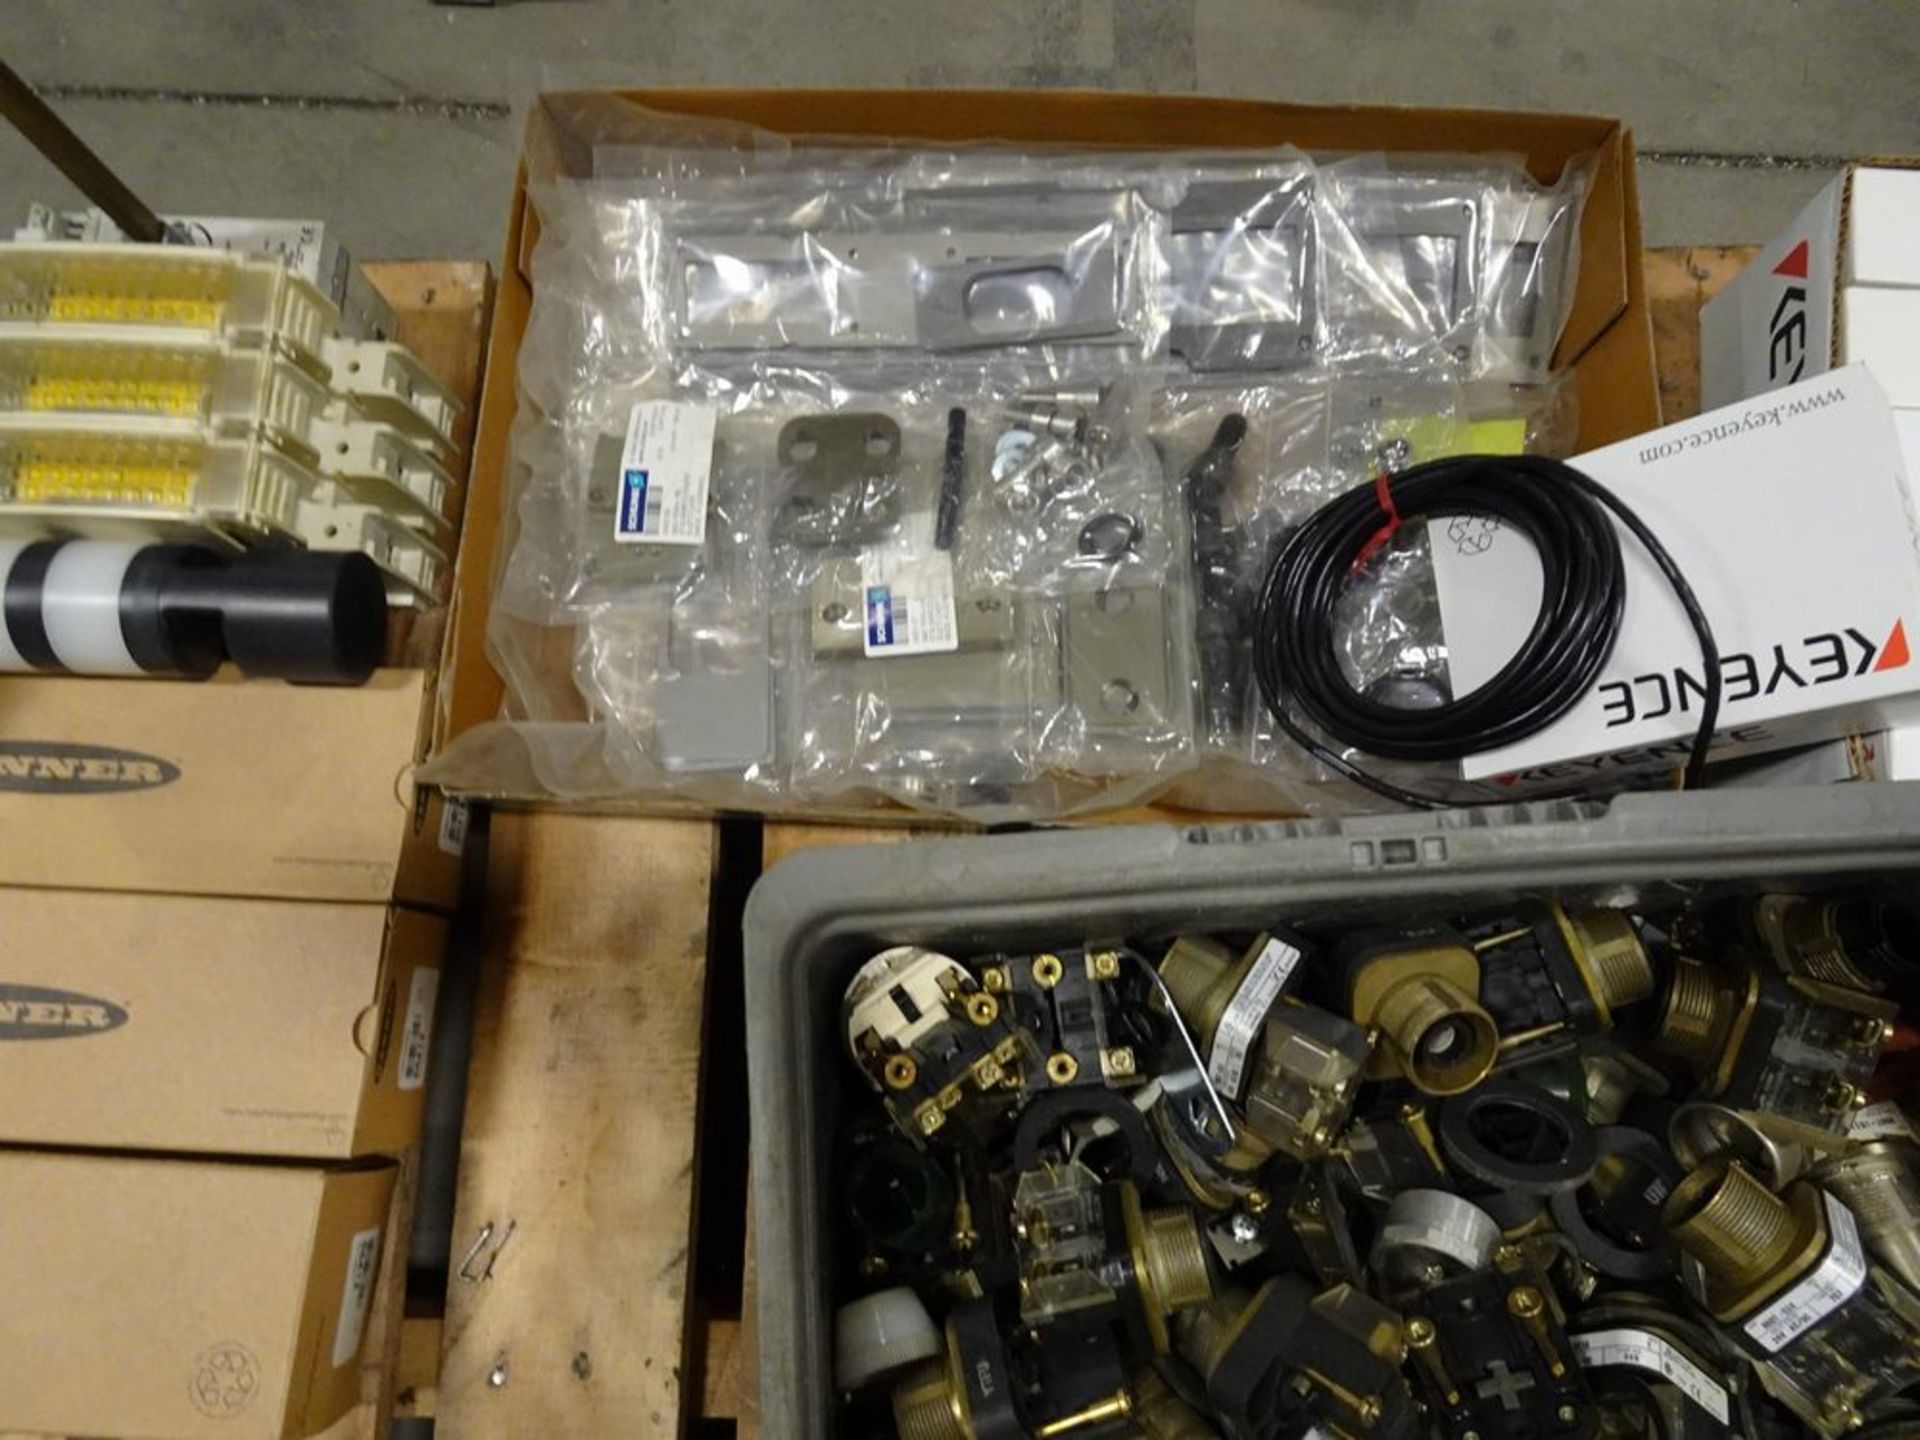 PALLET OF ASSORTED KEYENCE PRODUCT, ALLEN-BRADLEY SWITCHES, RELAYS, ETC. - Image 4 of 4